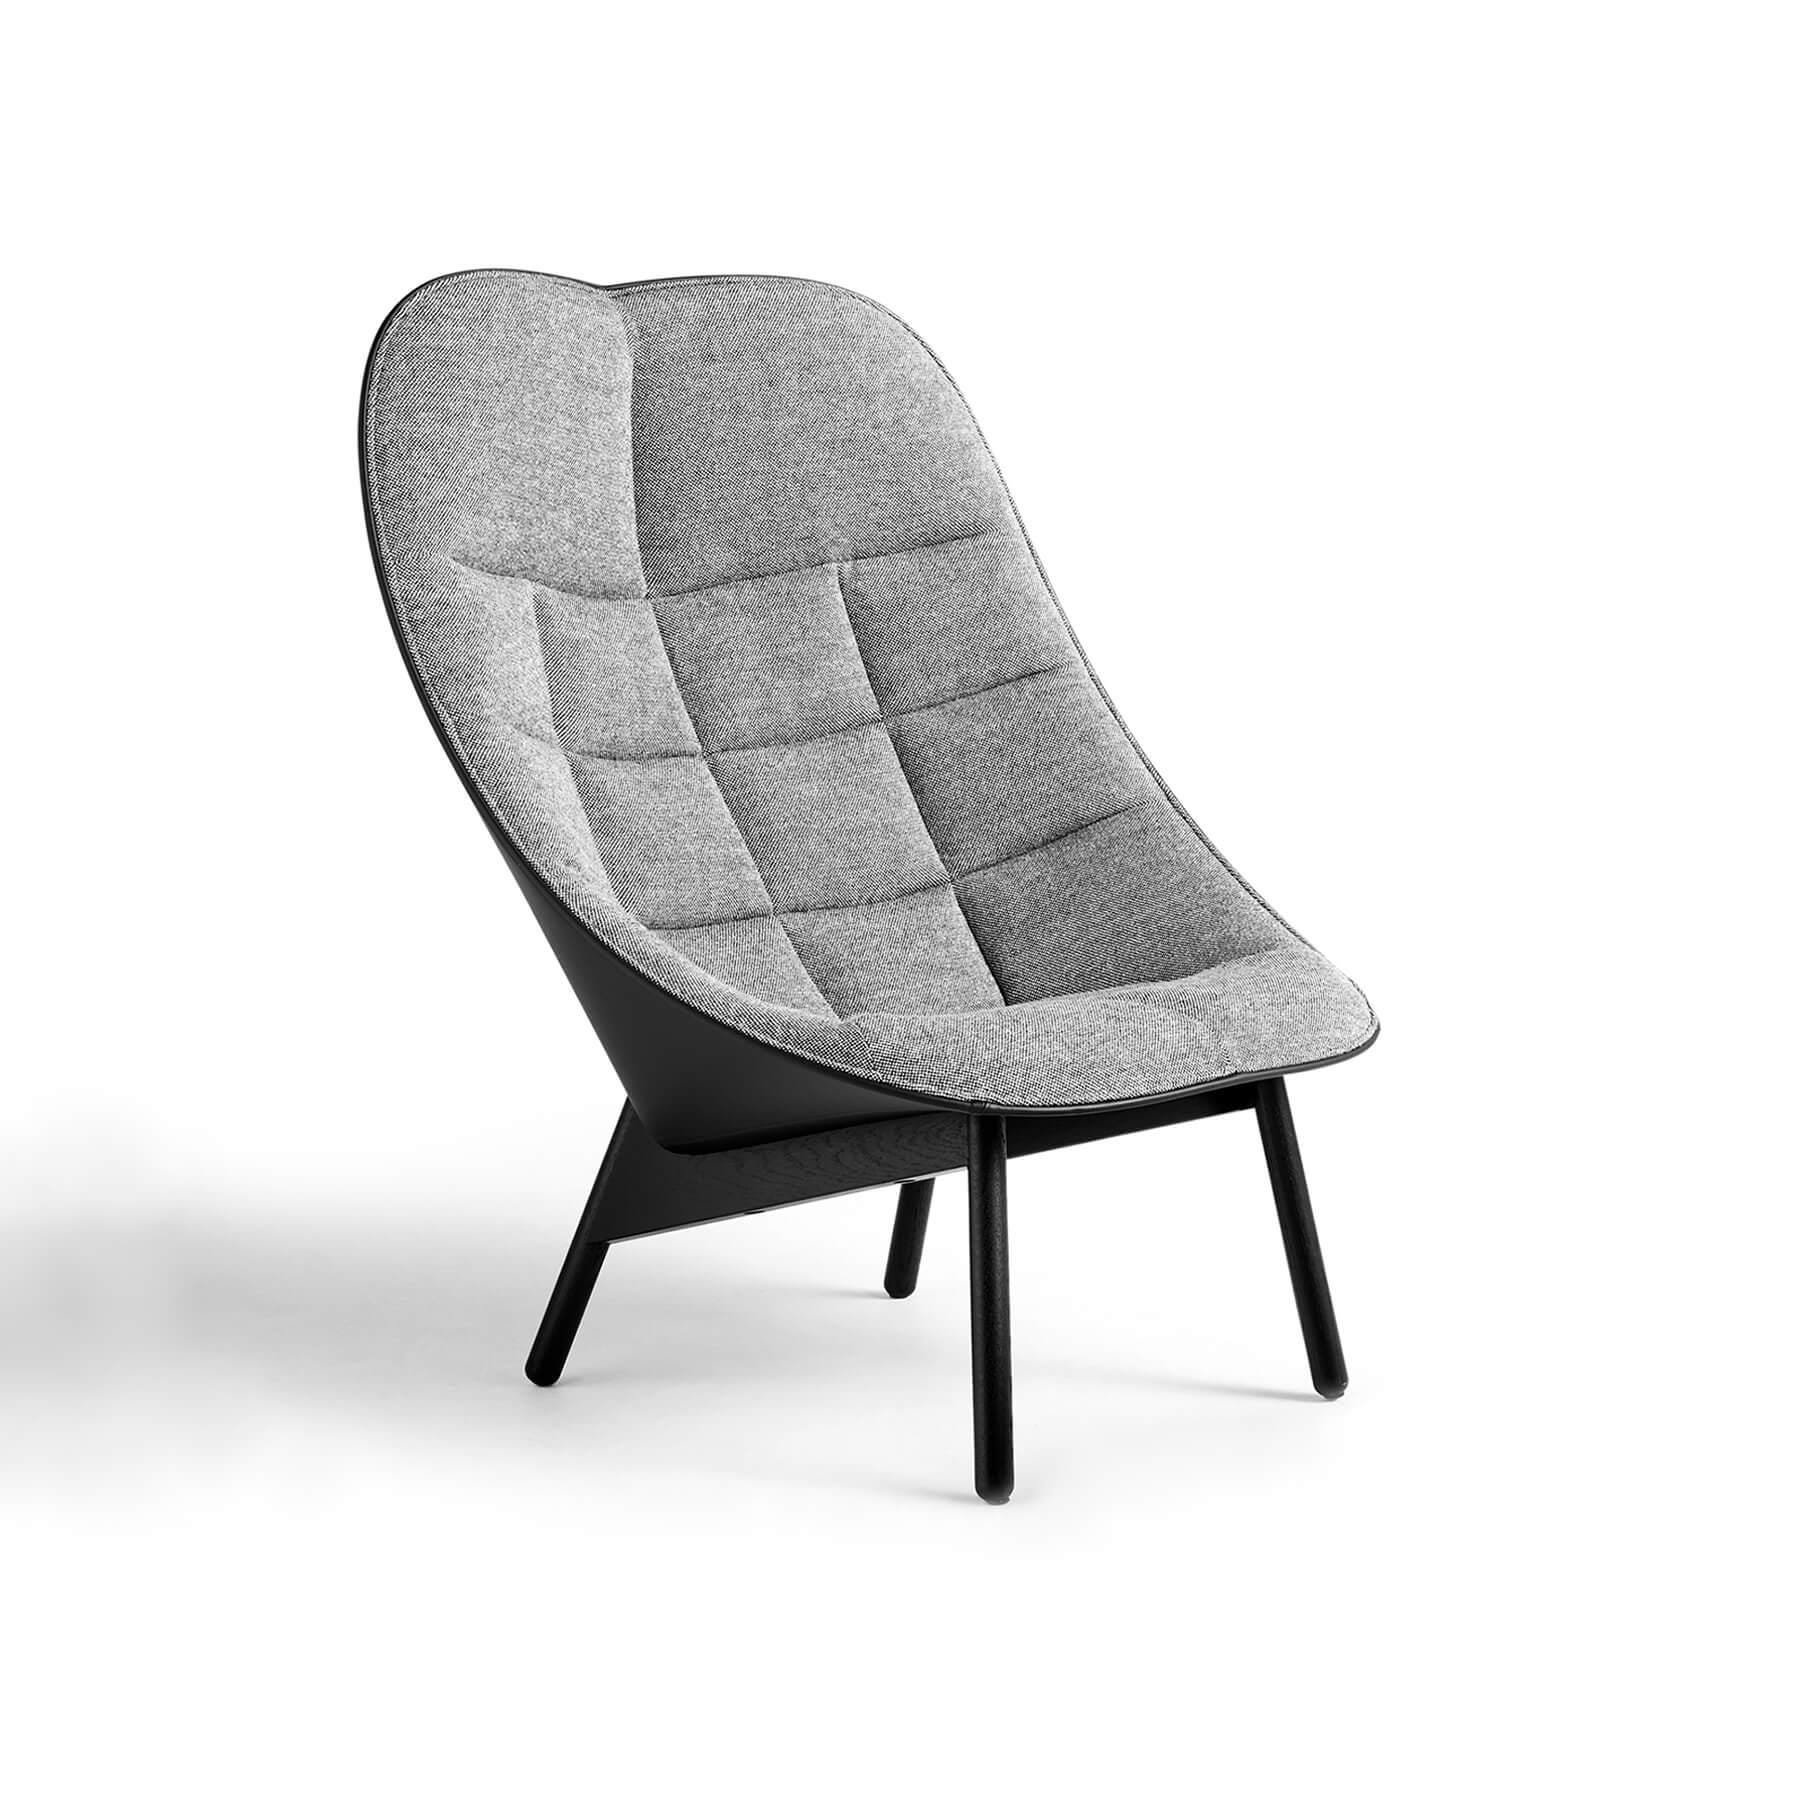 Hay Uchiwa Lounge Chair Quilted Hallingdal 166 Sierra Si1001 Black Oak Base No Ottoman Grey Designer Furniture From Holloways Of Ludlow